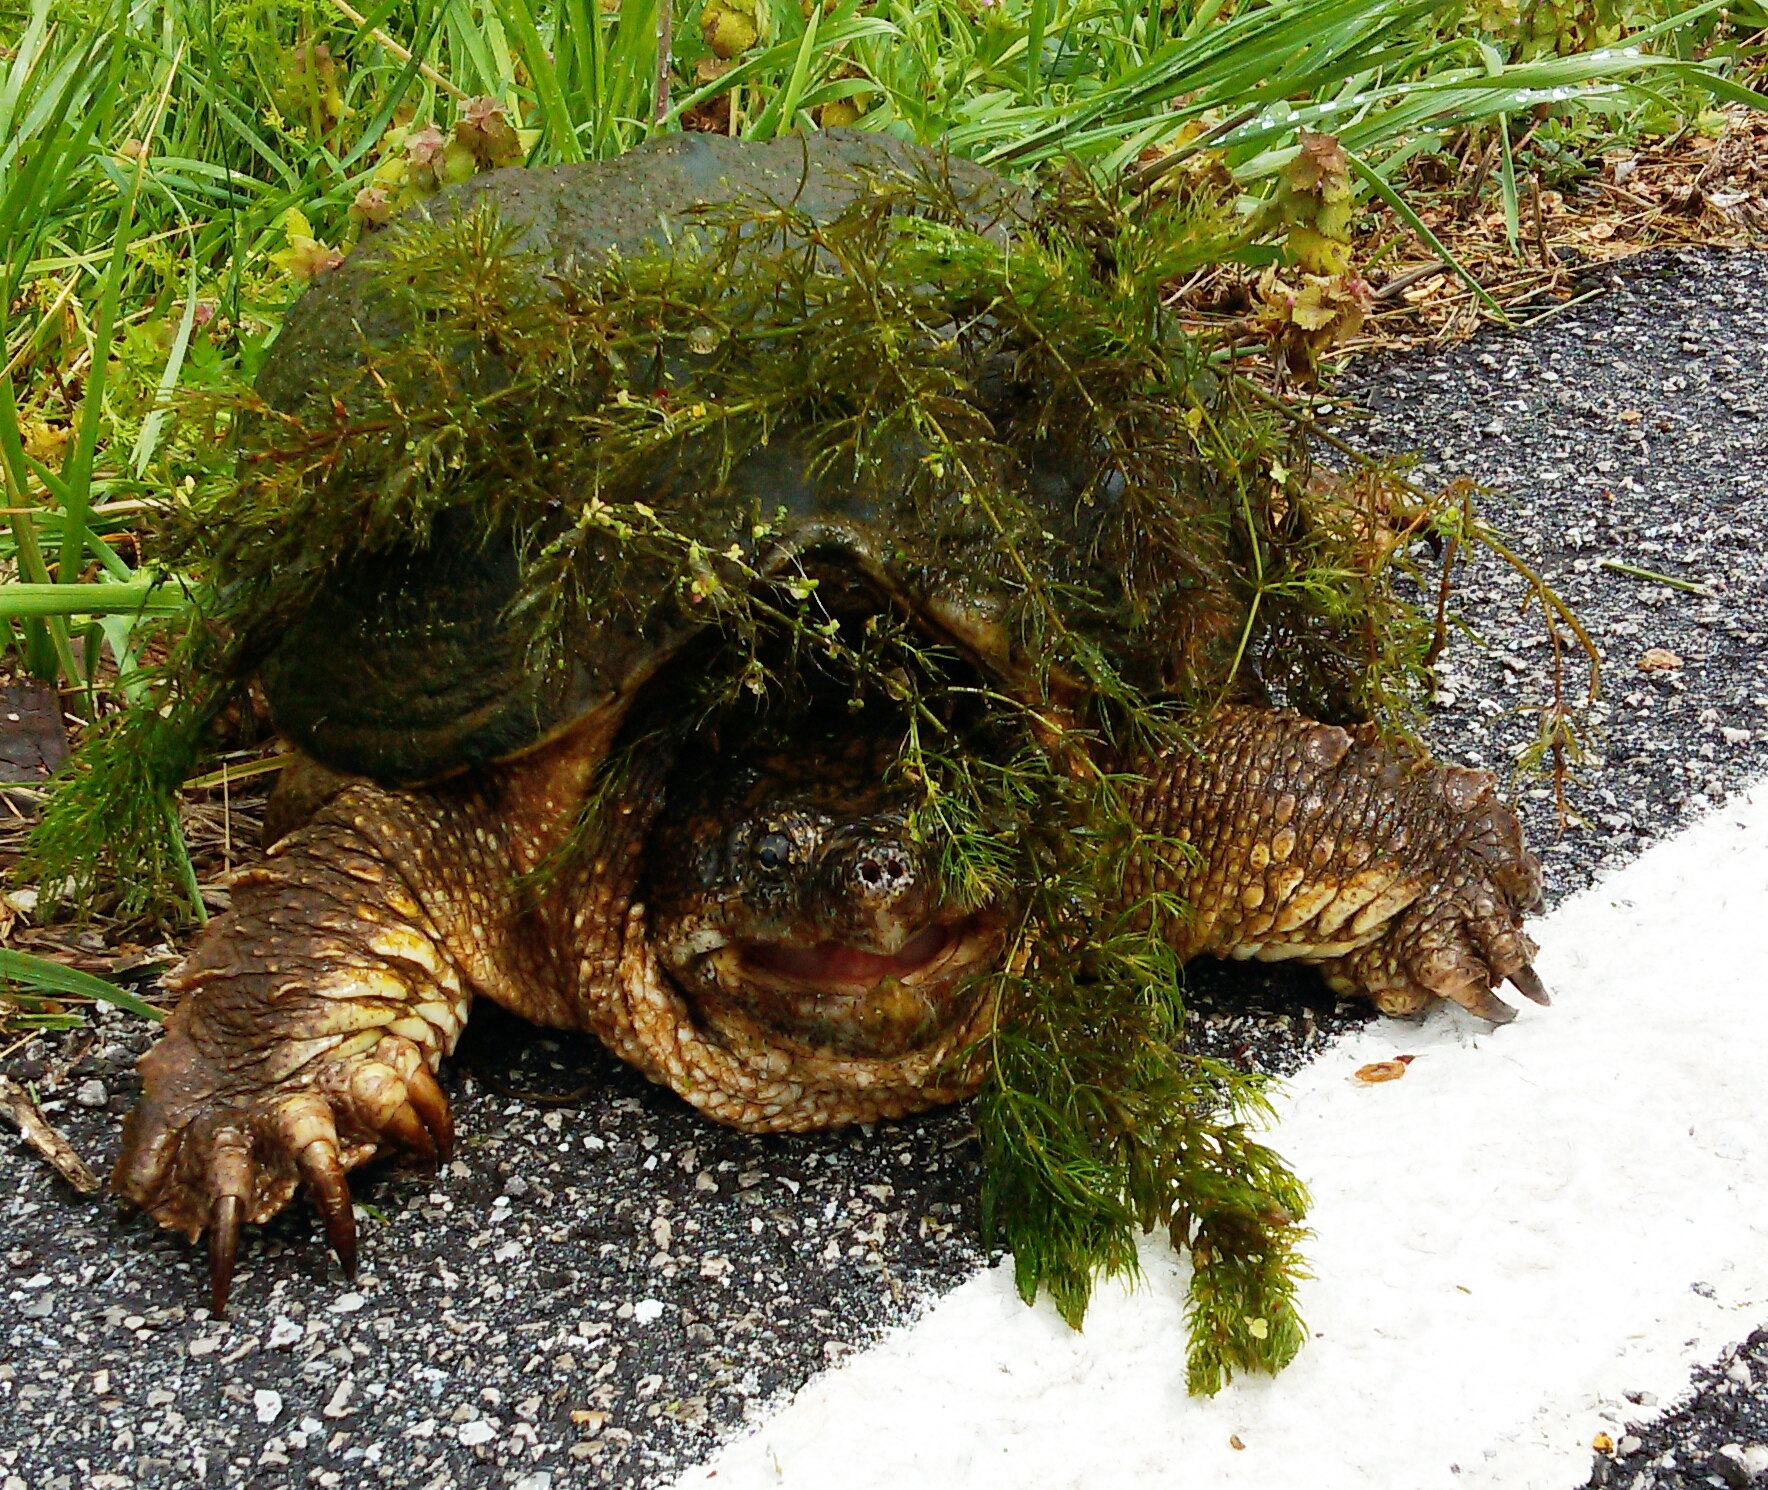 snapping turtle crossing road